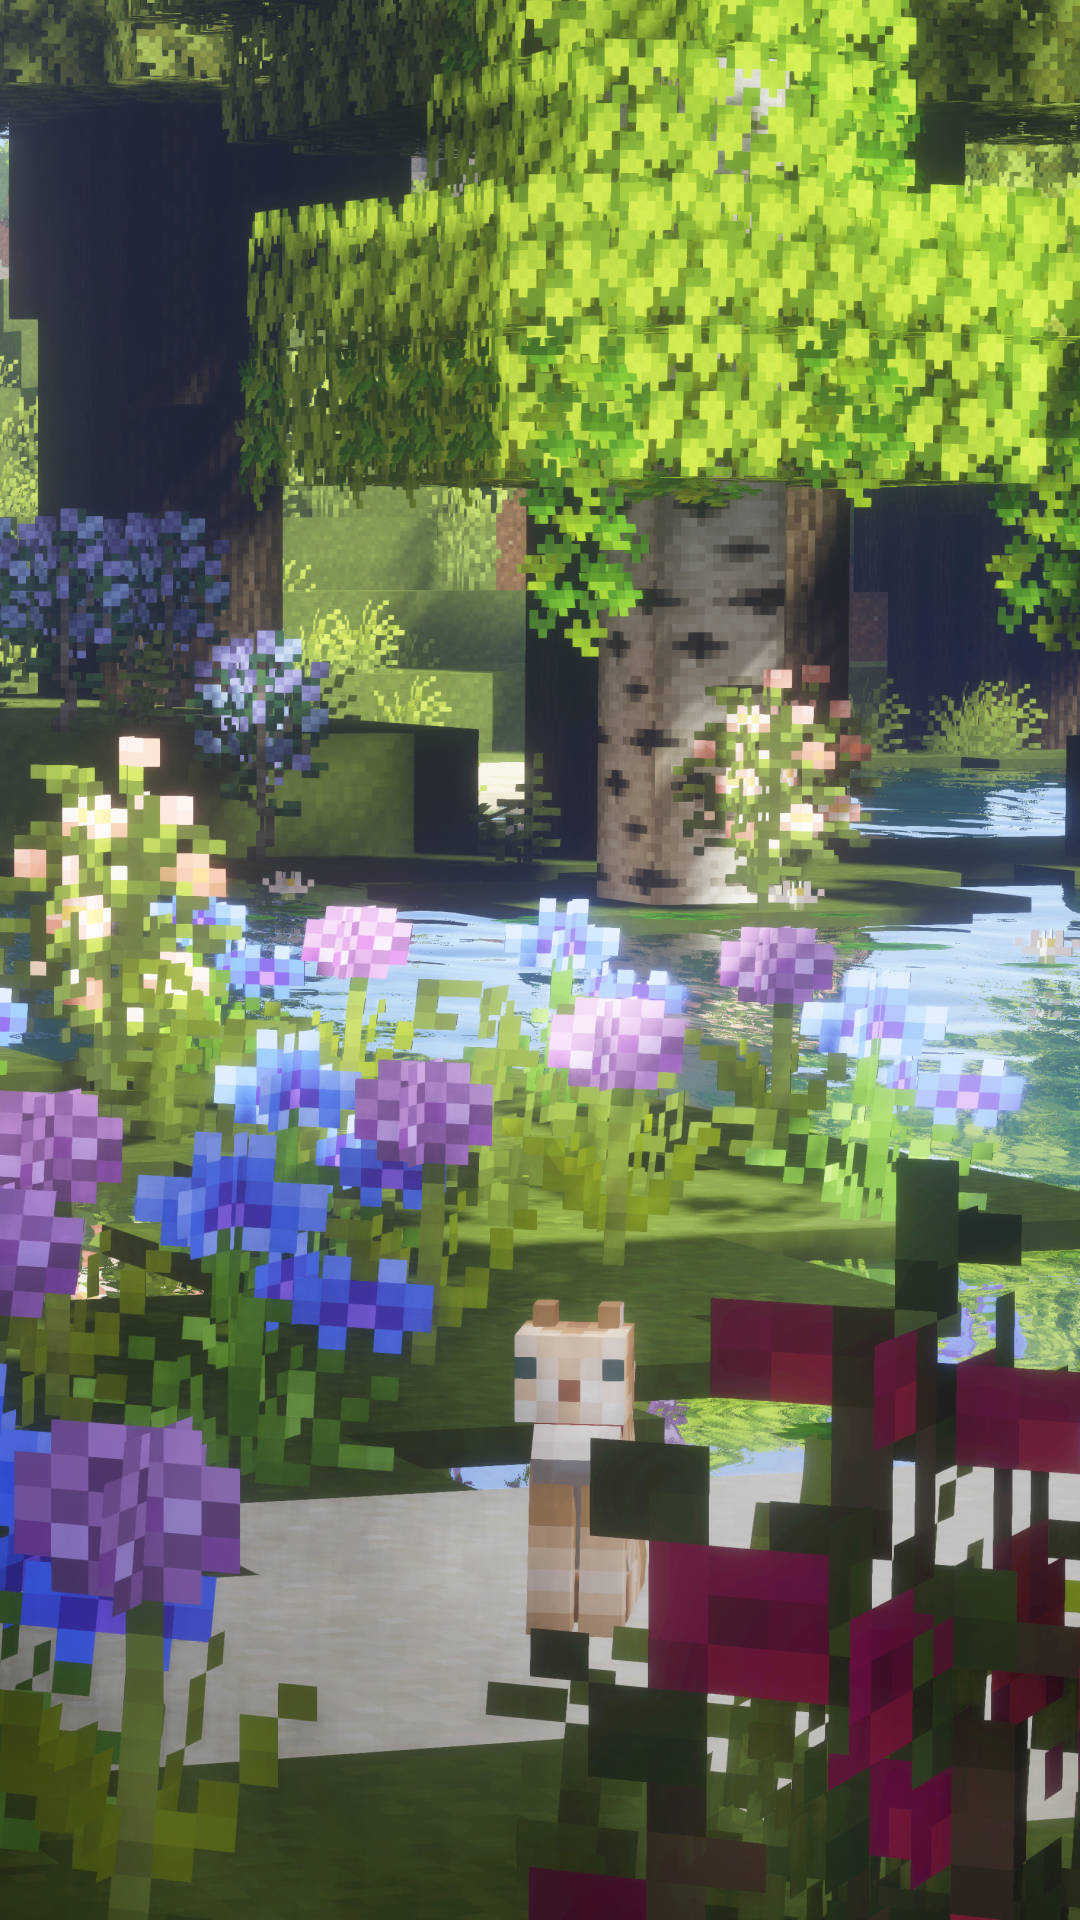 Blooming Flowers In Garden Minecraft Aesthetic Picture